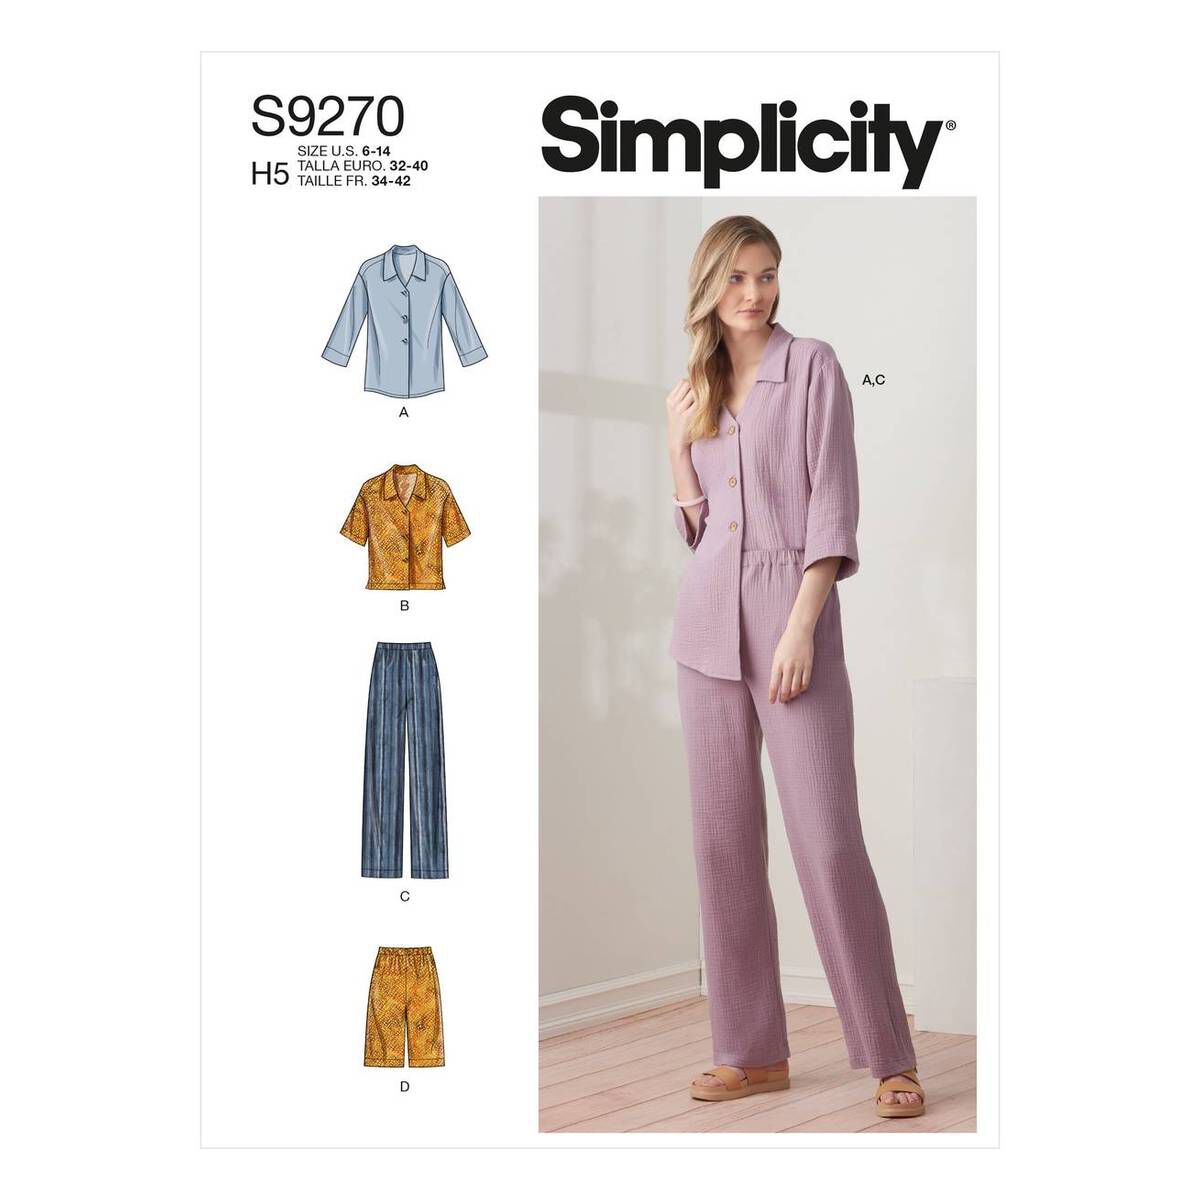 Simplicity Tops and Trousers Sewing Pattern S9270 (6-14) | Hobbycraft